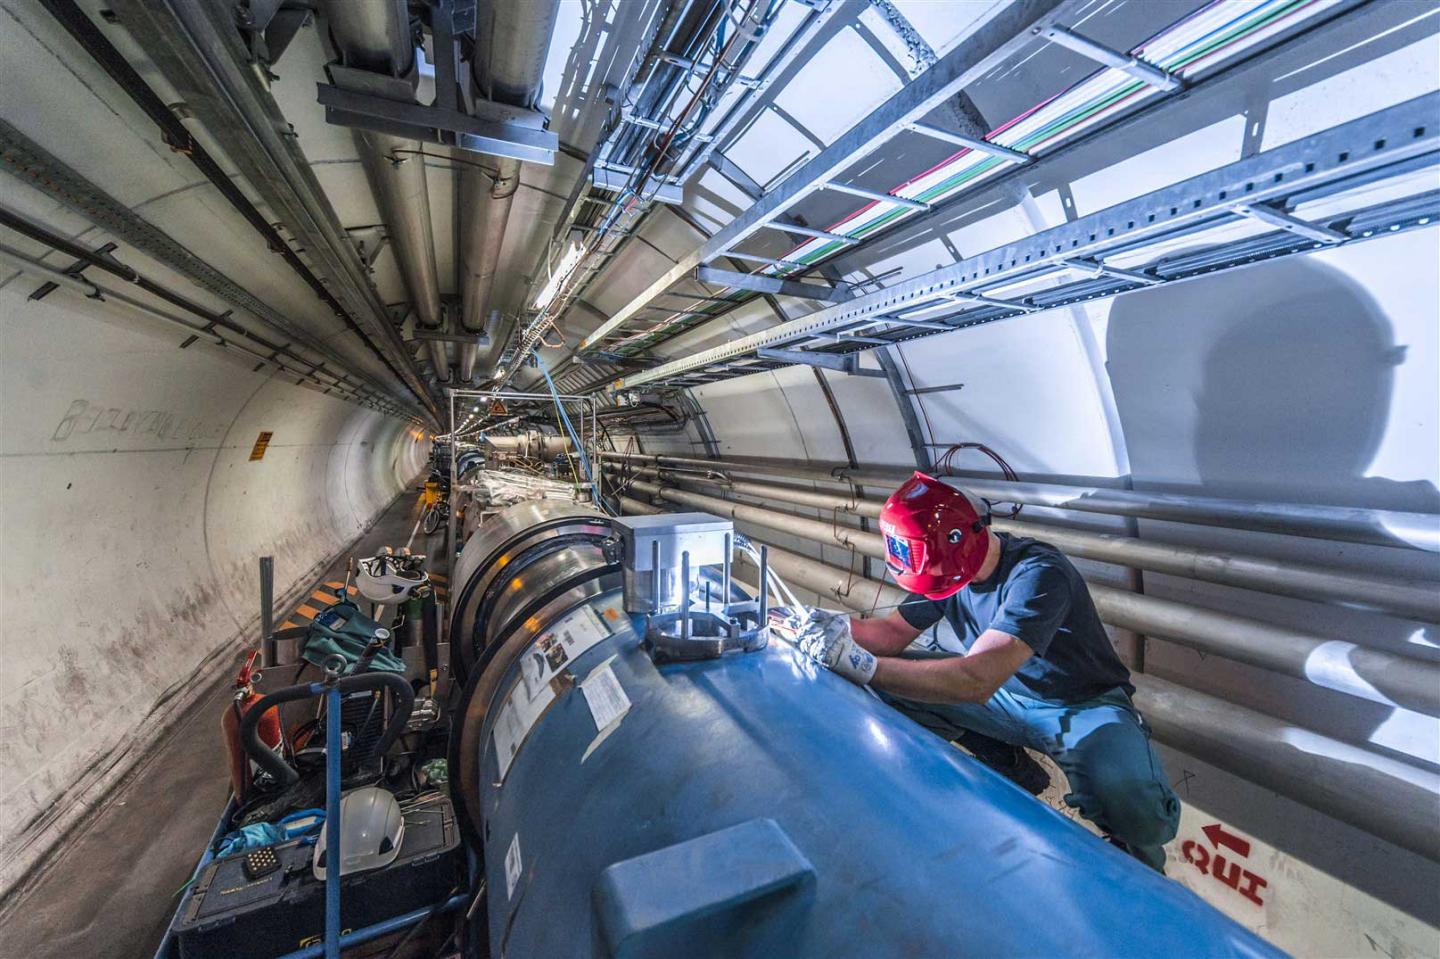 CERN's two-year shutdown drawing to a close